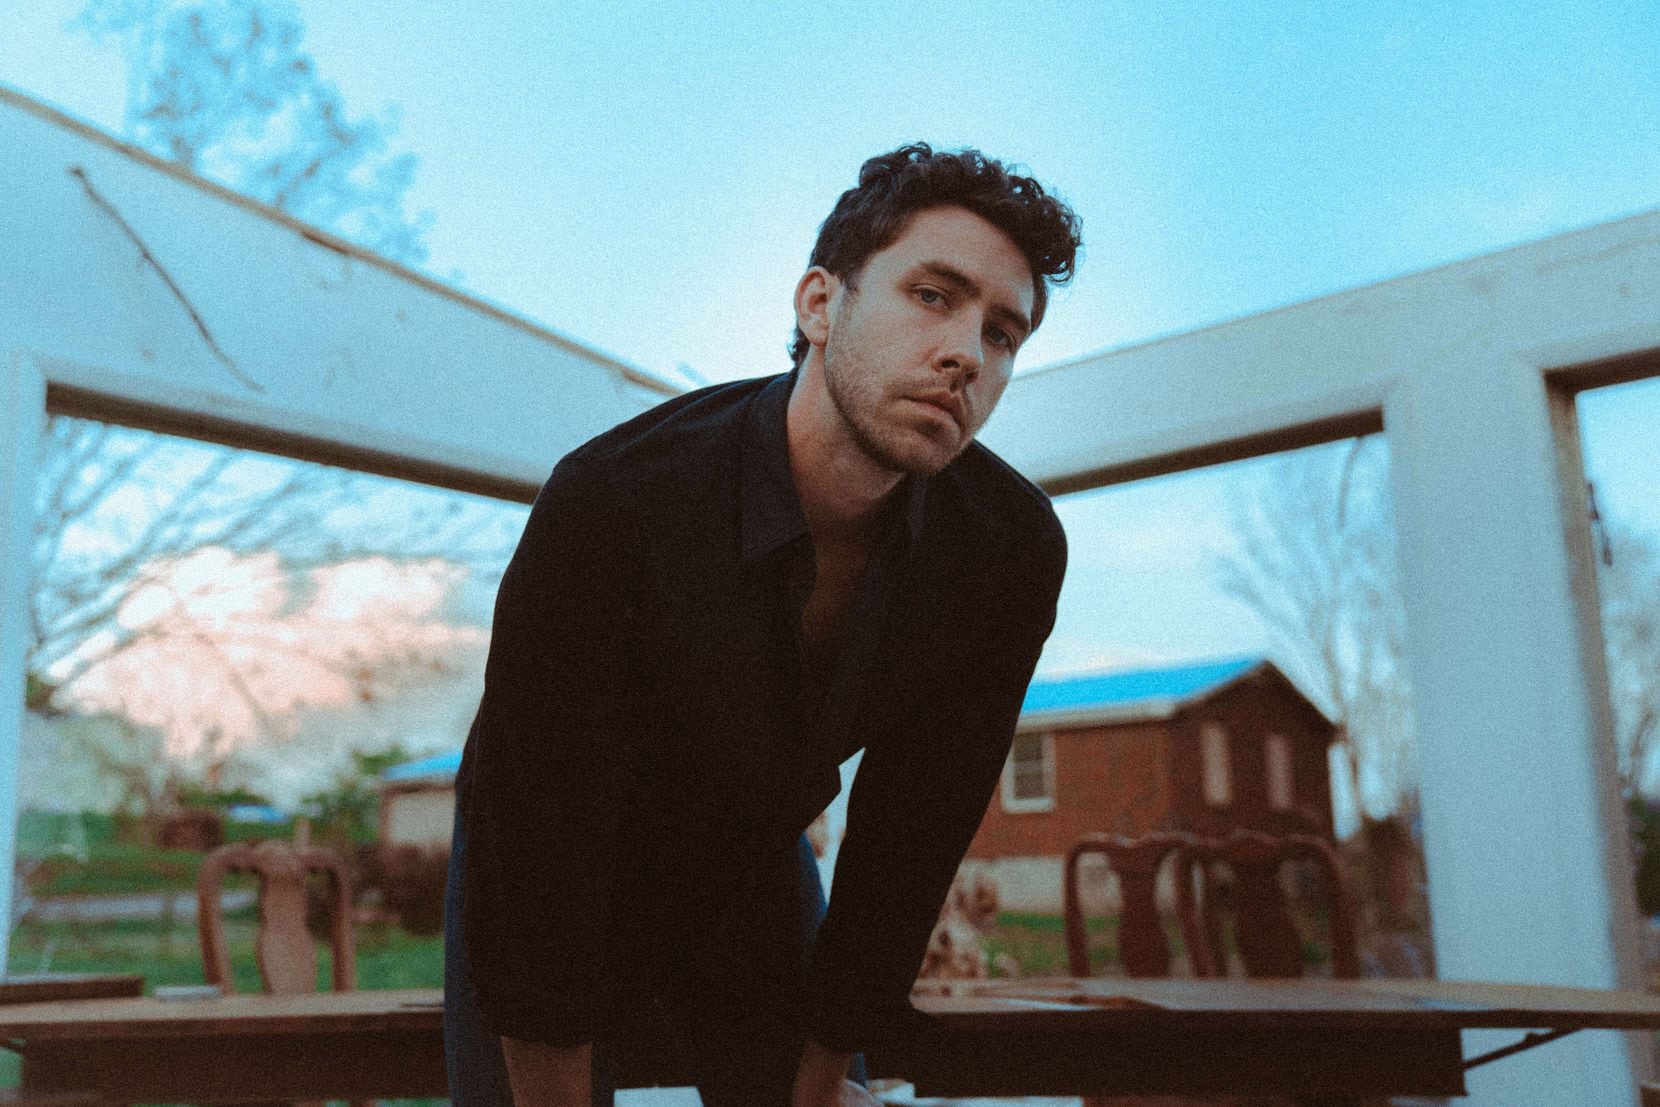 Joshua Dylan Balis is preparing to release his debut LP, "We're on Fire," on Dallas-based...